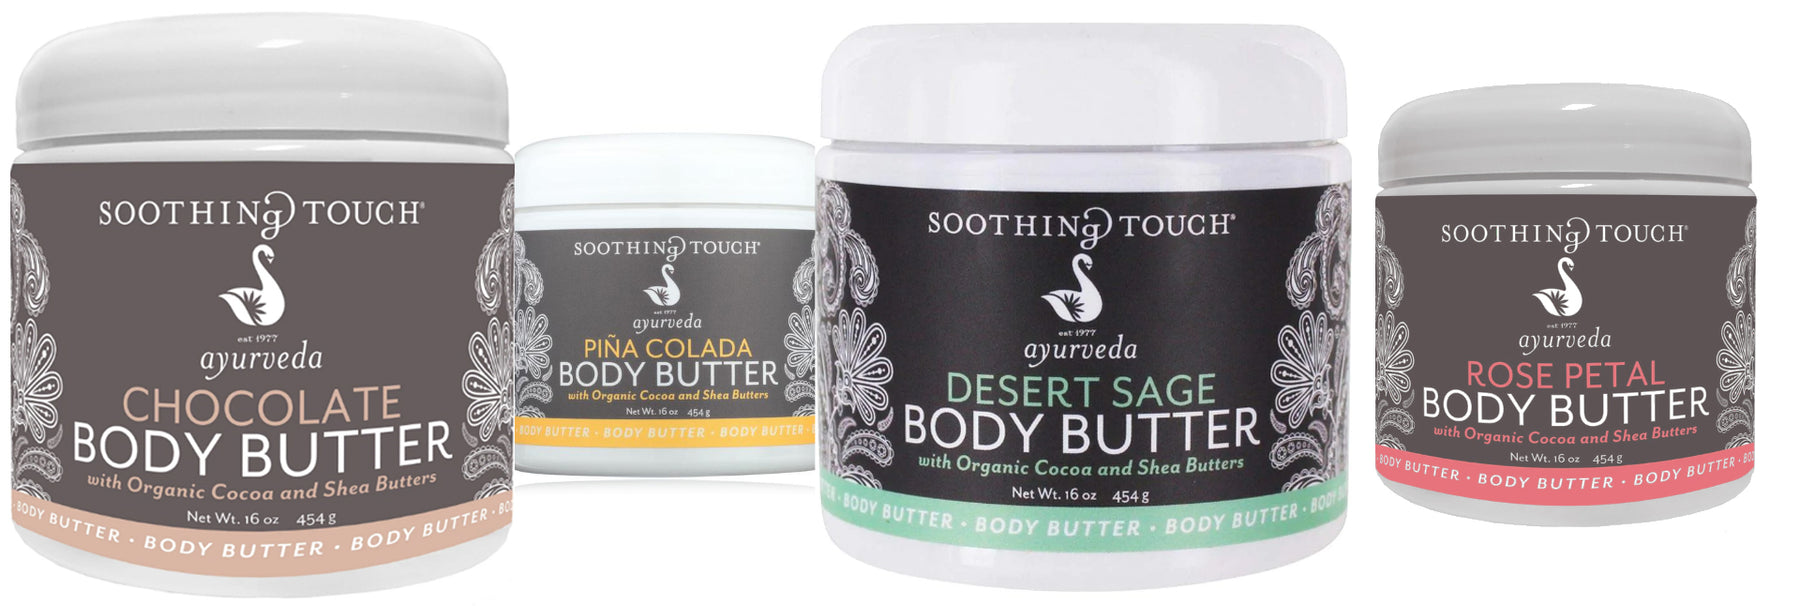 Soothing Touch Body Butter Collection